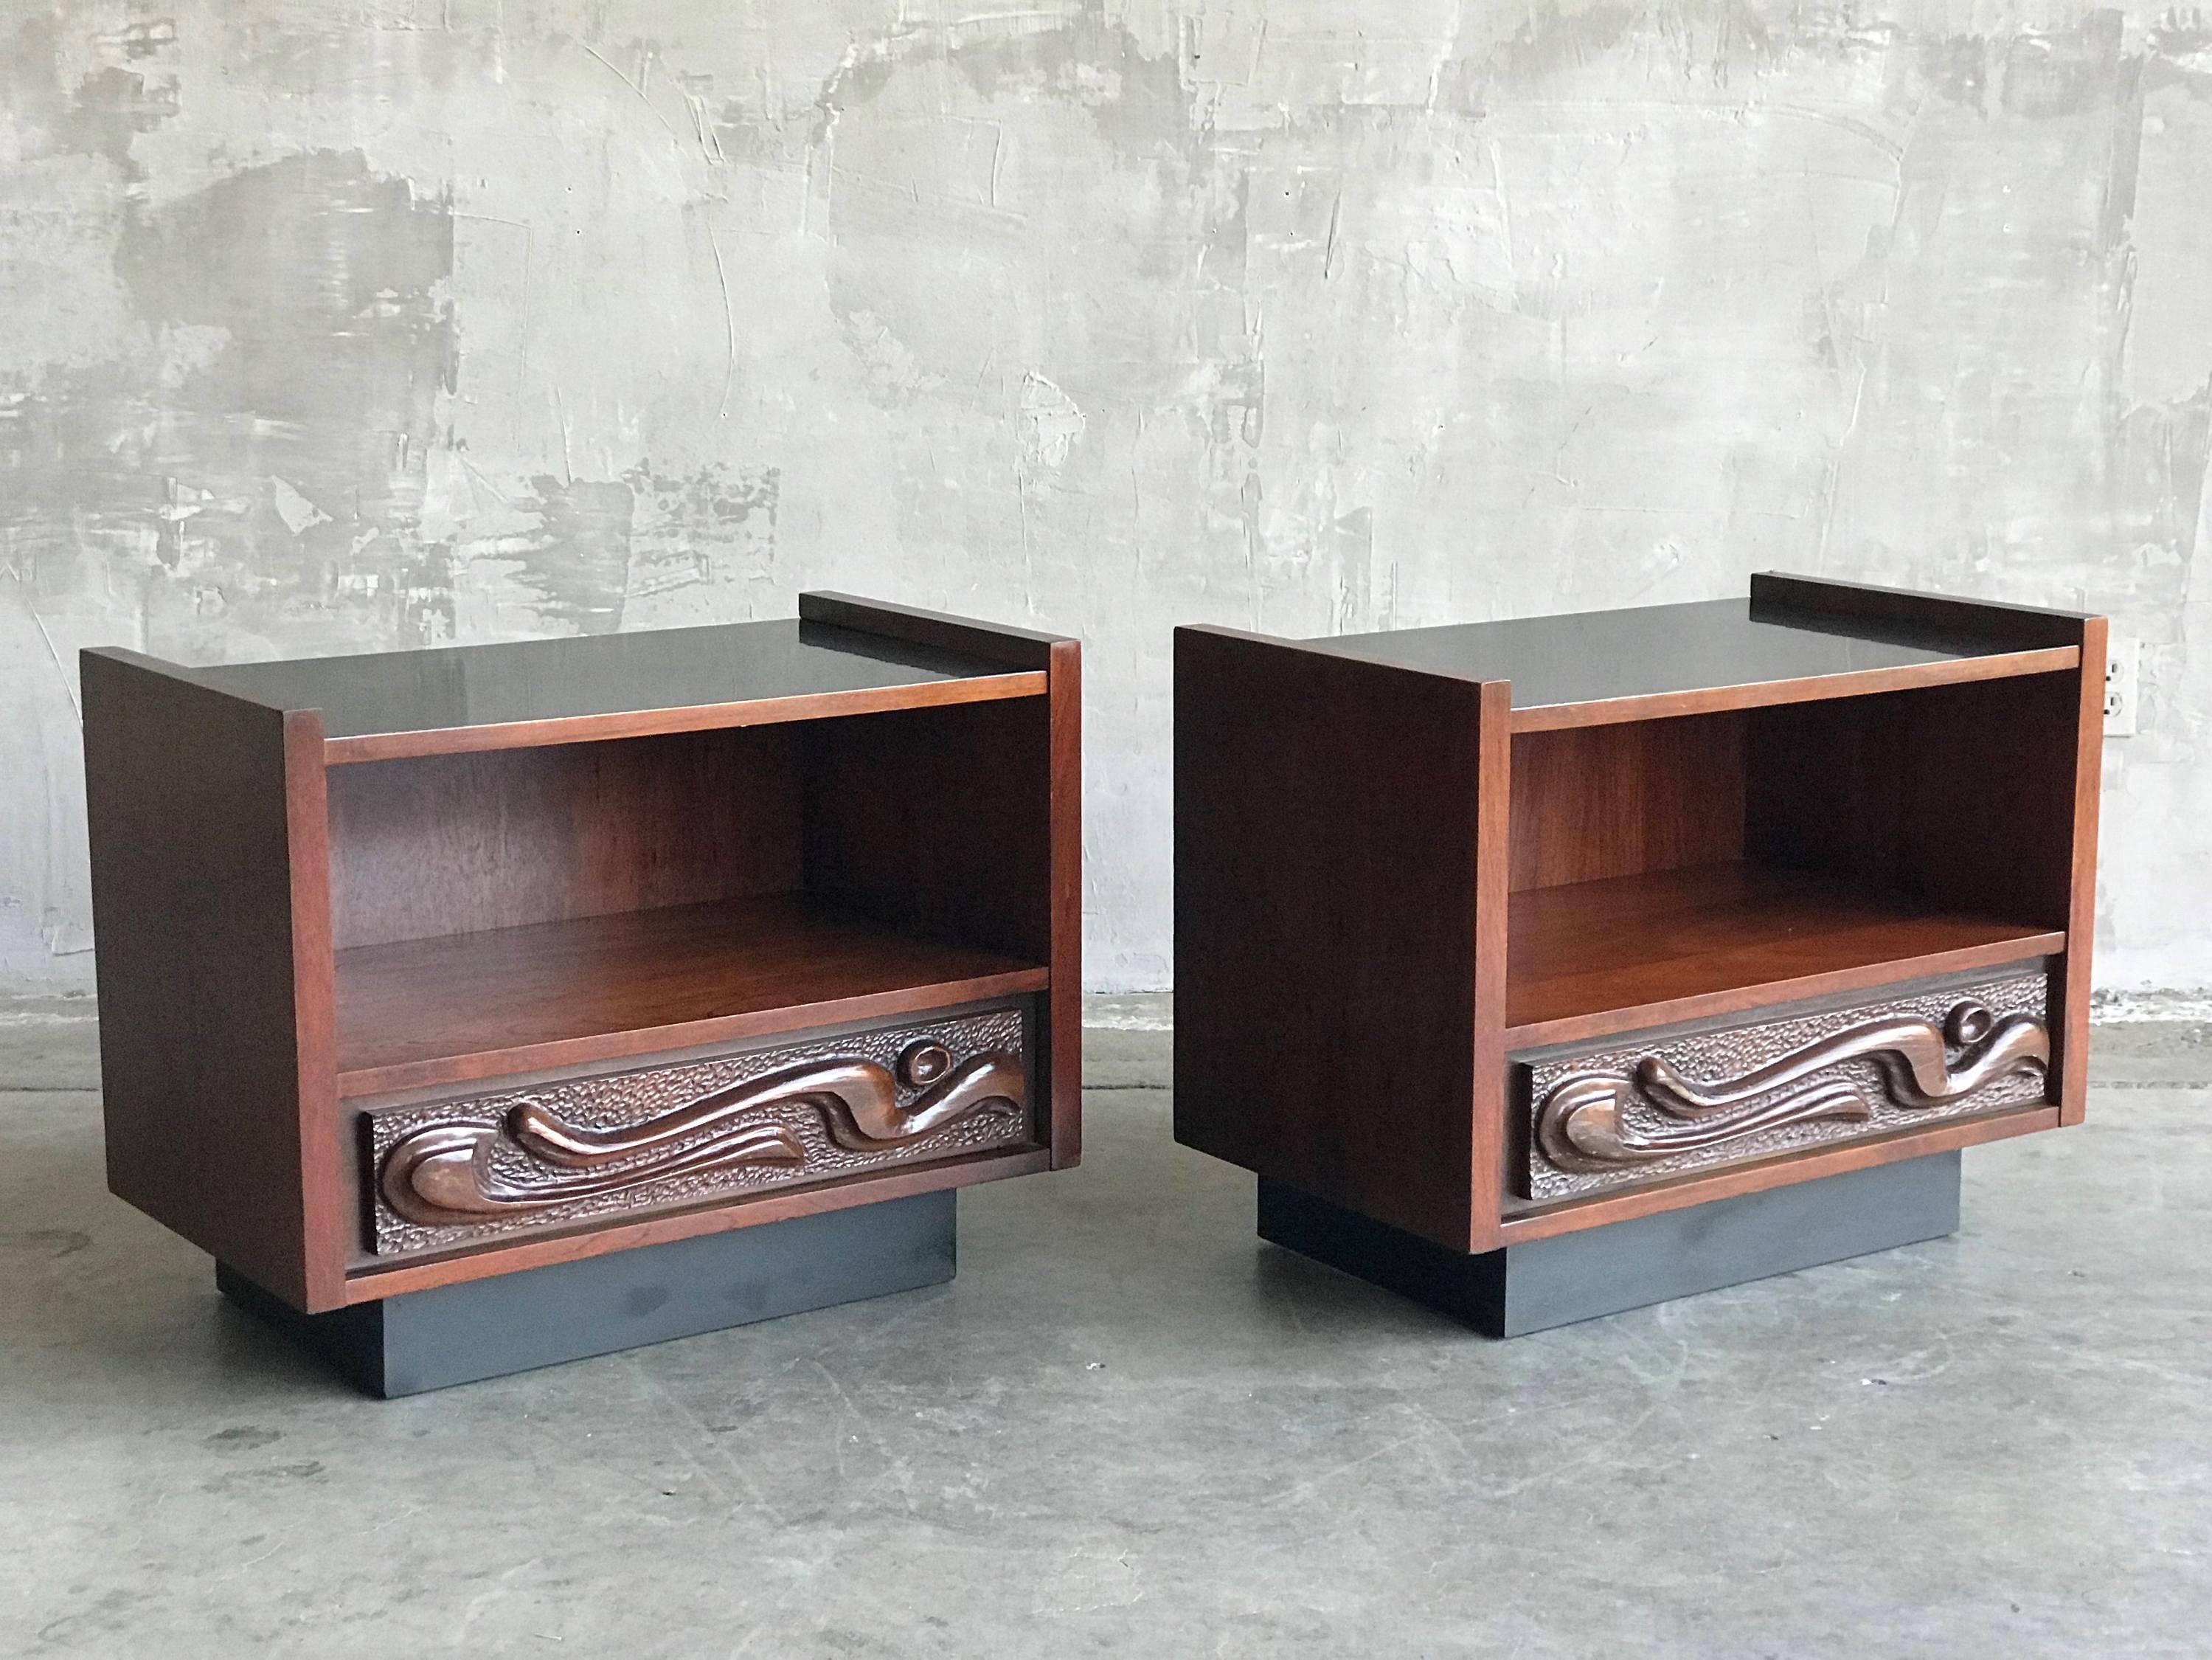 Cool sculptural pair of Witco style Oceanic sculptural nightstands by Pulanski. Very richly toned walnut case sitting on a black plinth base. Featuring black tops and a single drawer.